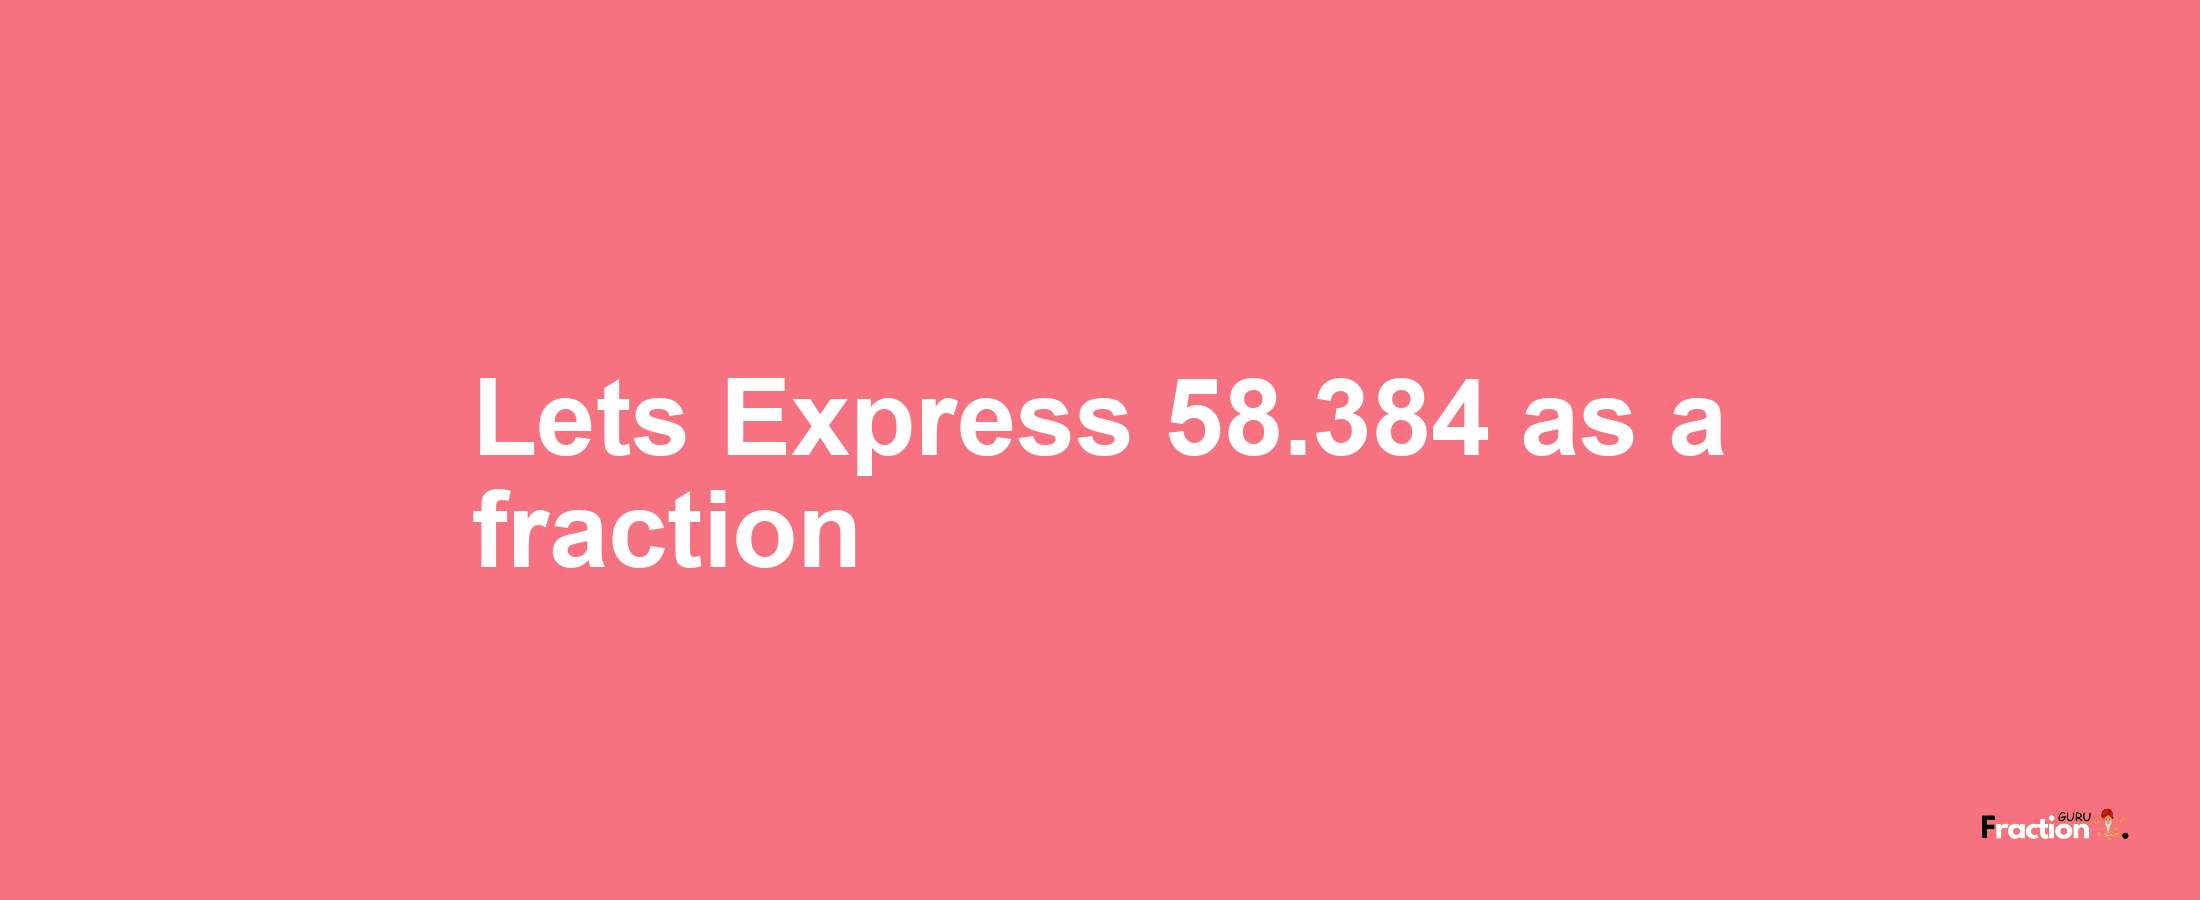 Lets Express 58.384 as afraction